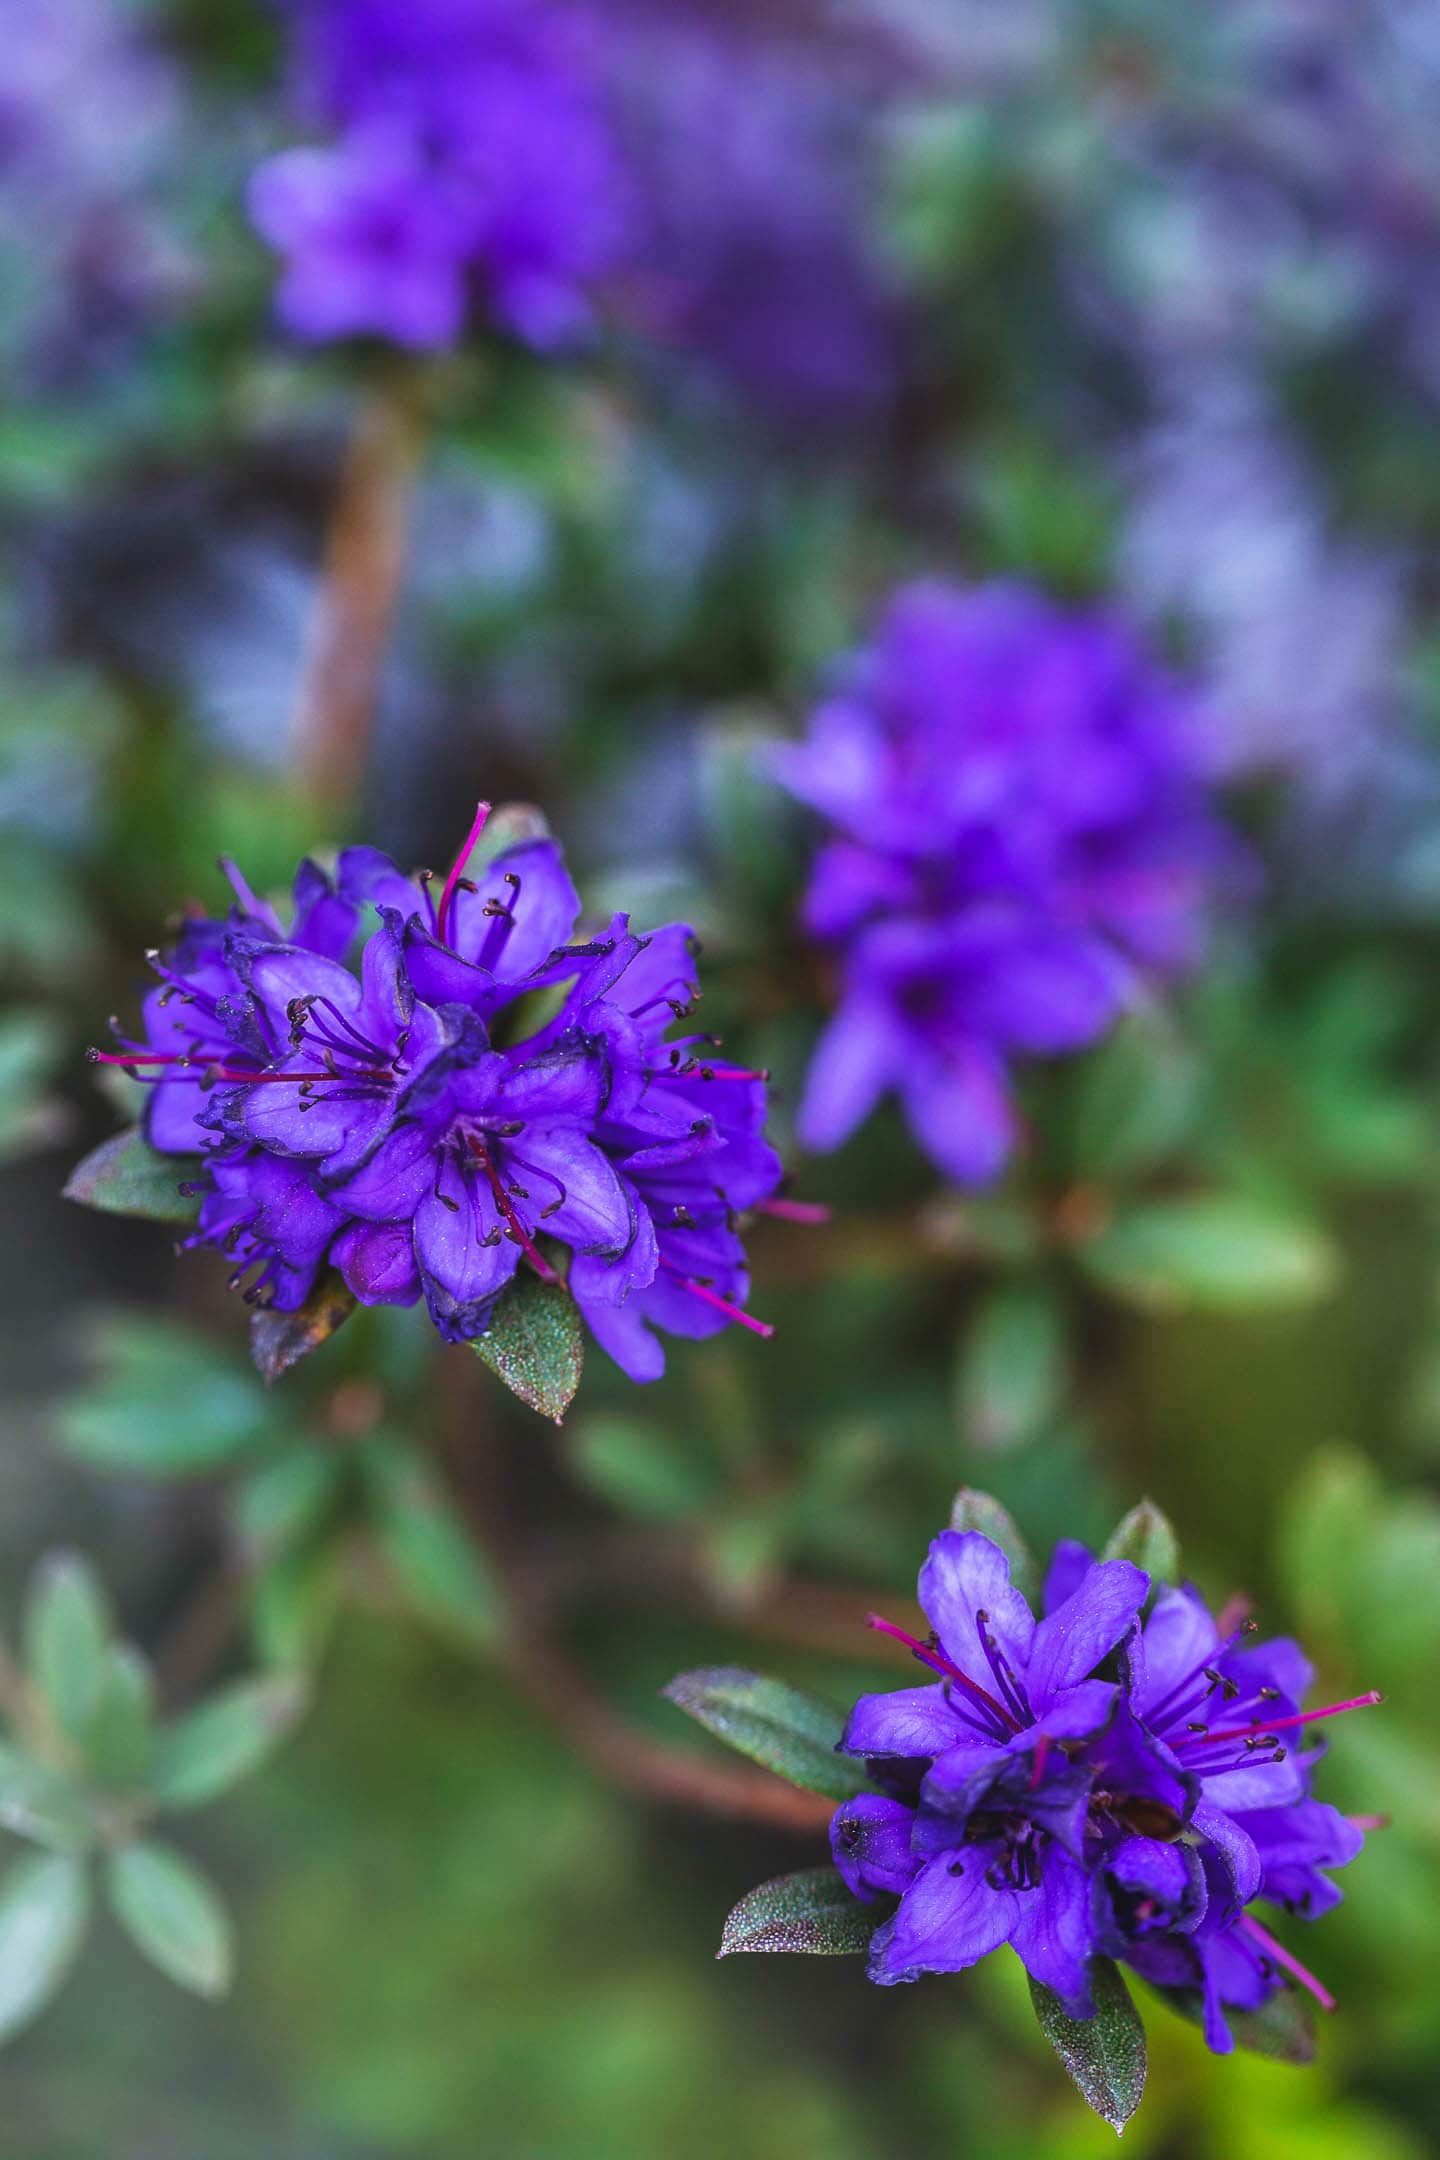 Rhododendron 'Blue Baron' with purple-blue flowers